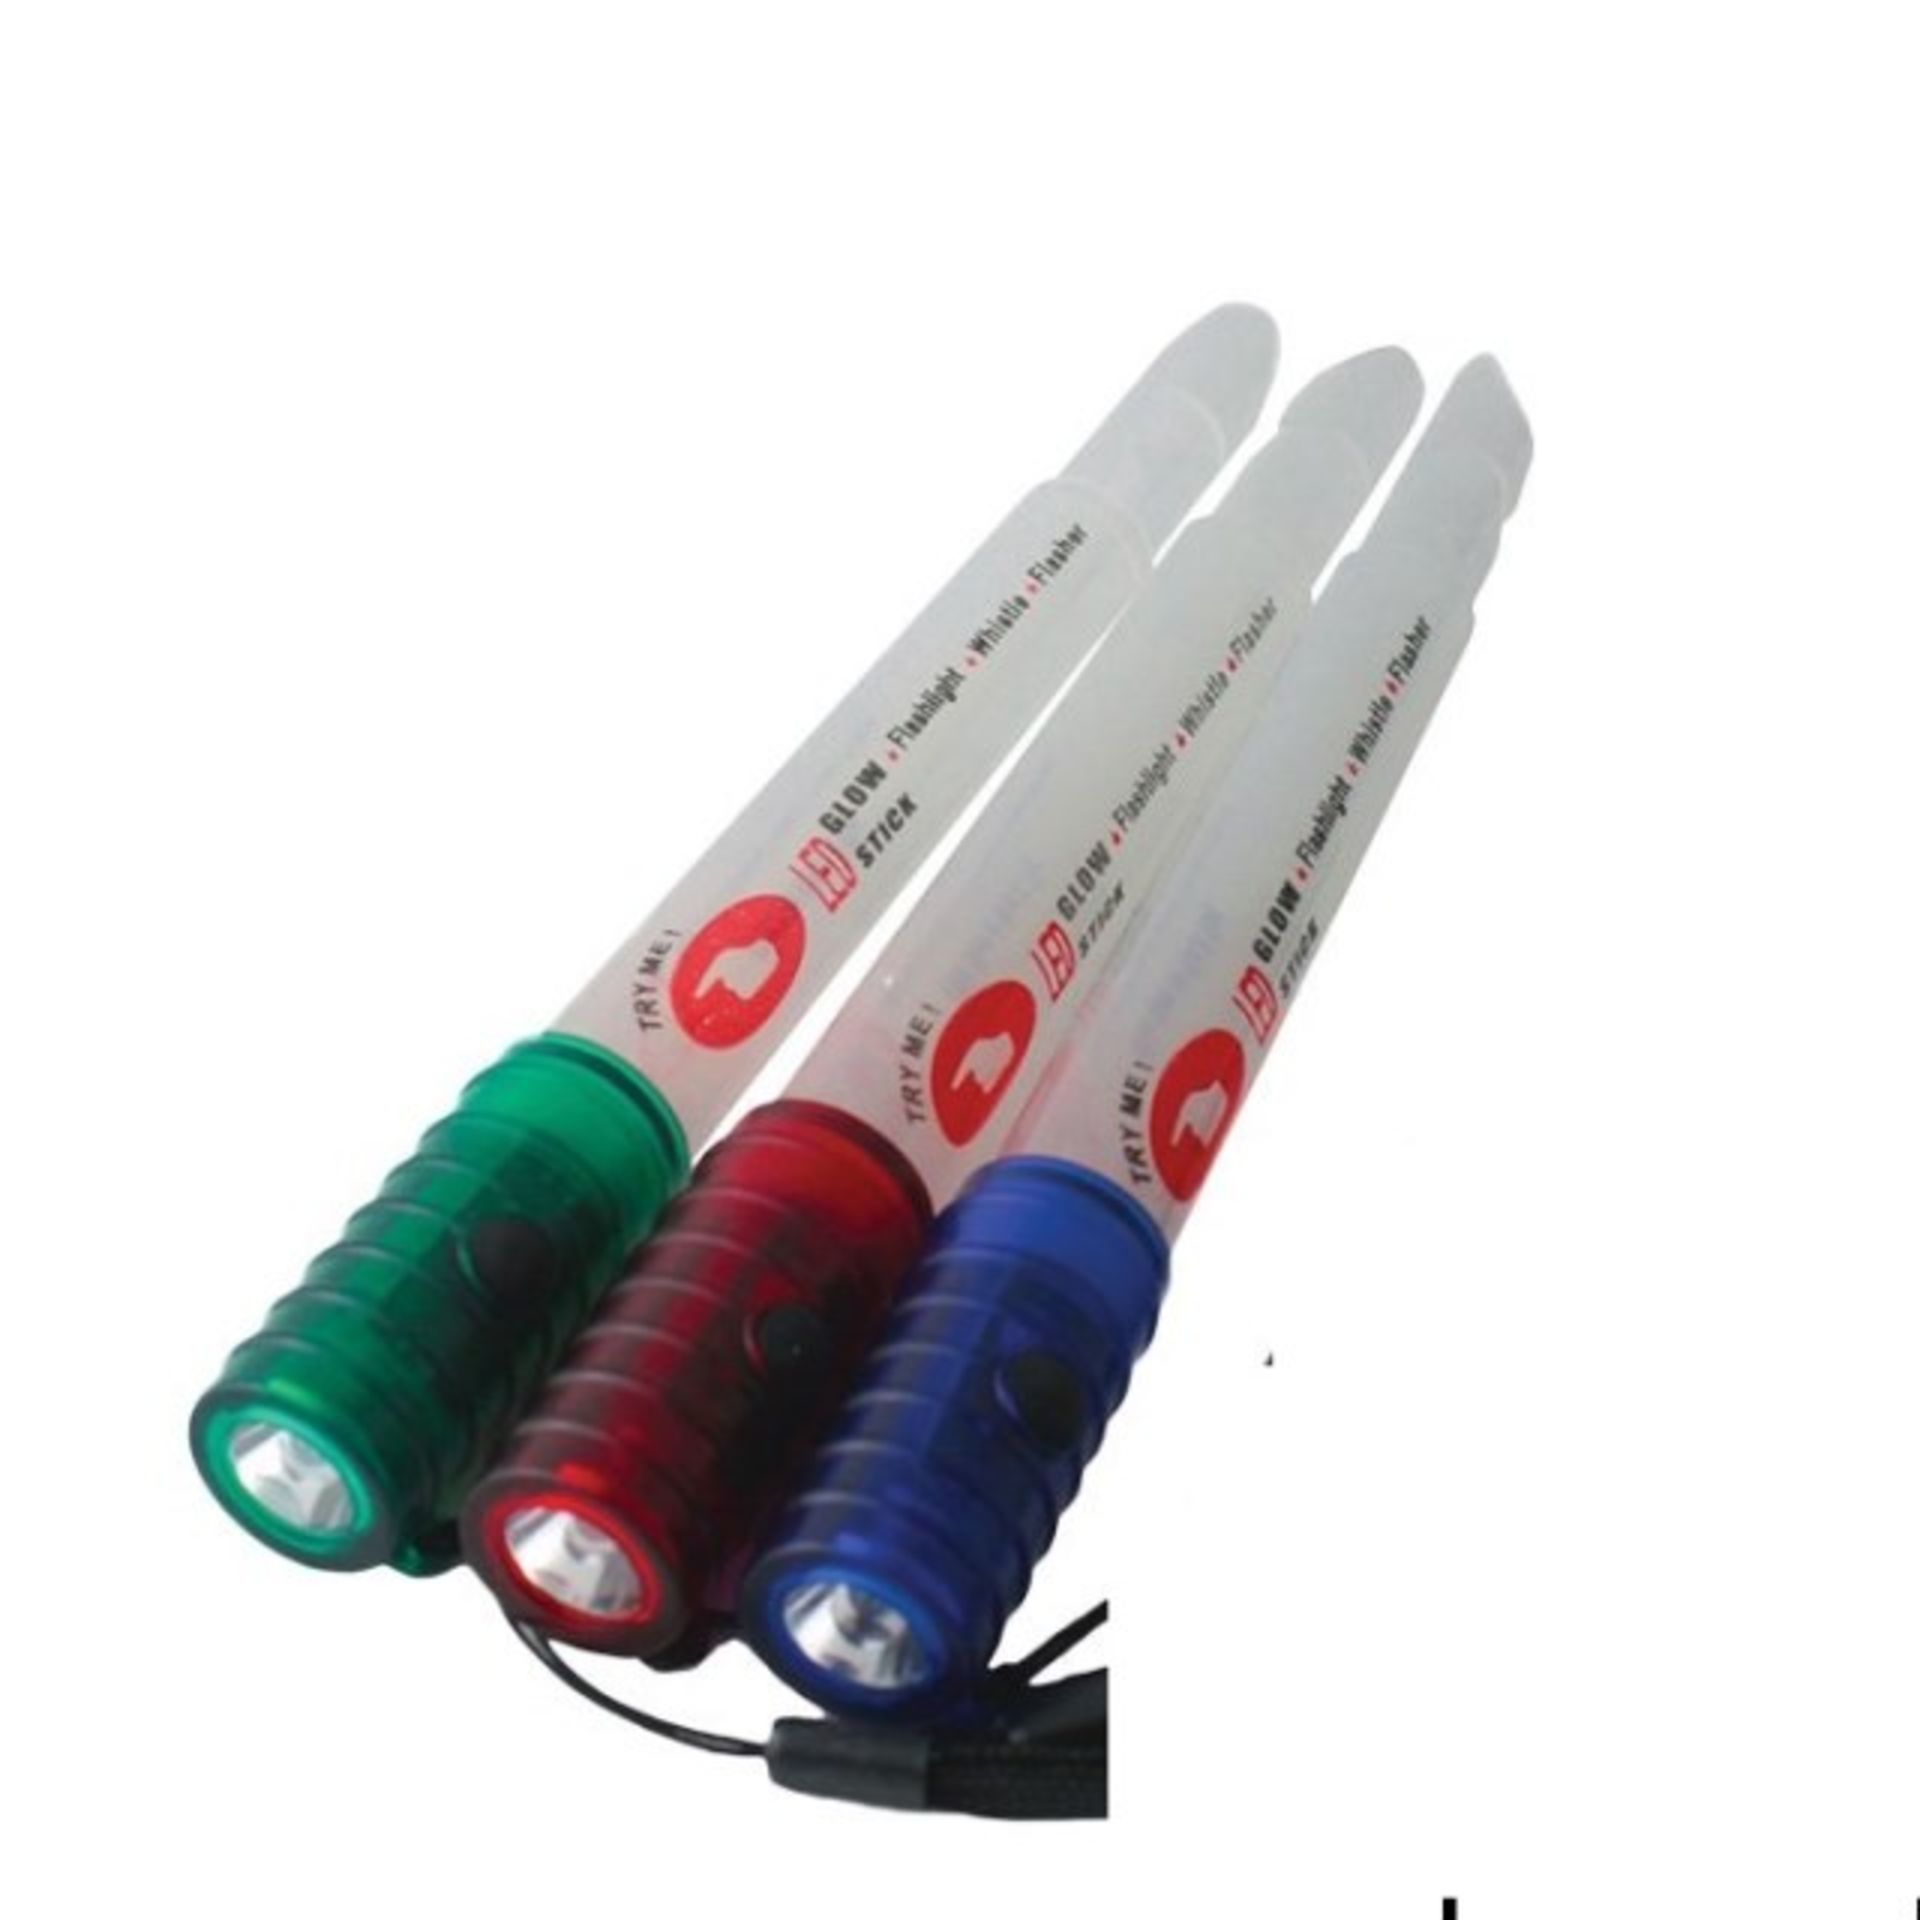 + VAT Brand New Three LED Glowstick Torches With Emergency Whistle and 3 Light Settings Includes - Image 2 of 3